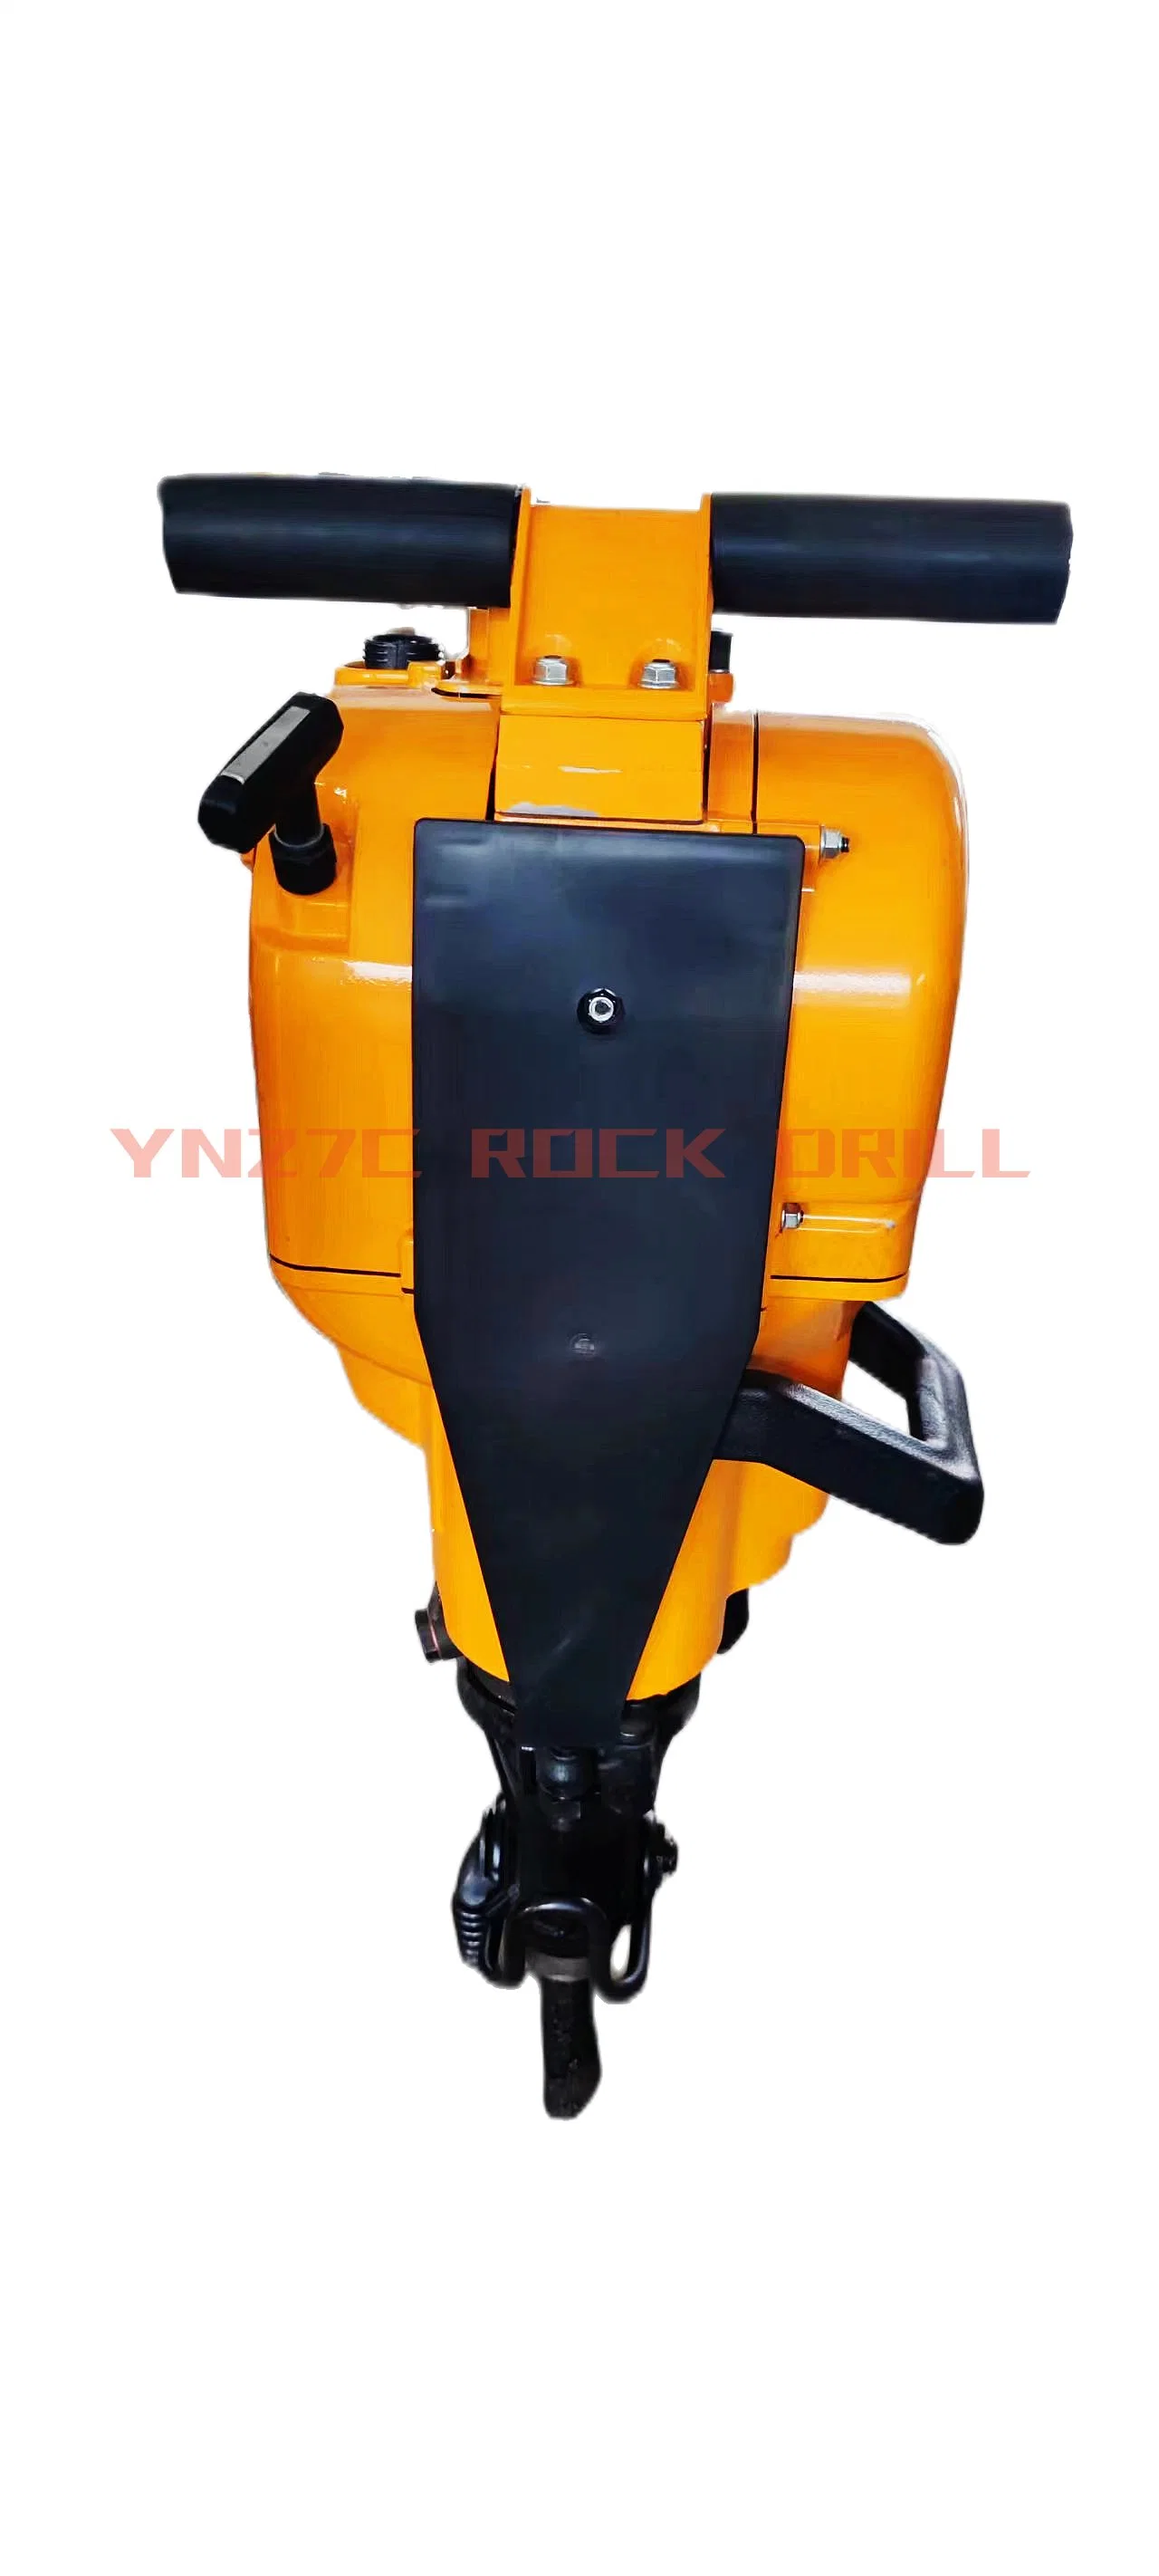 Yn27c Rock Drill Gasoline Tool Powerful and Widely Used